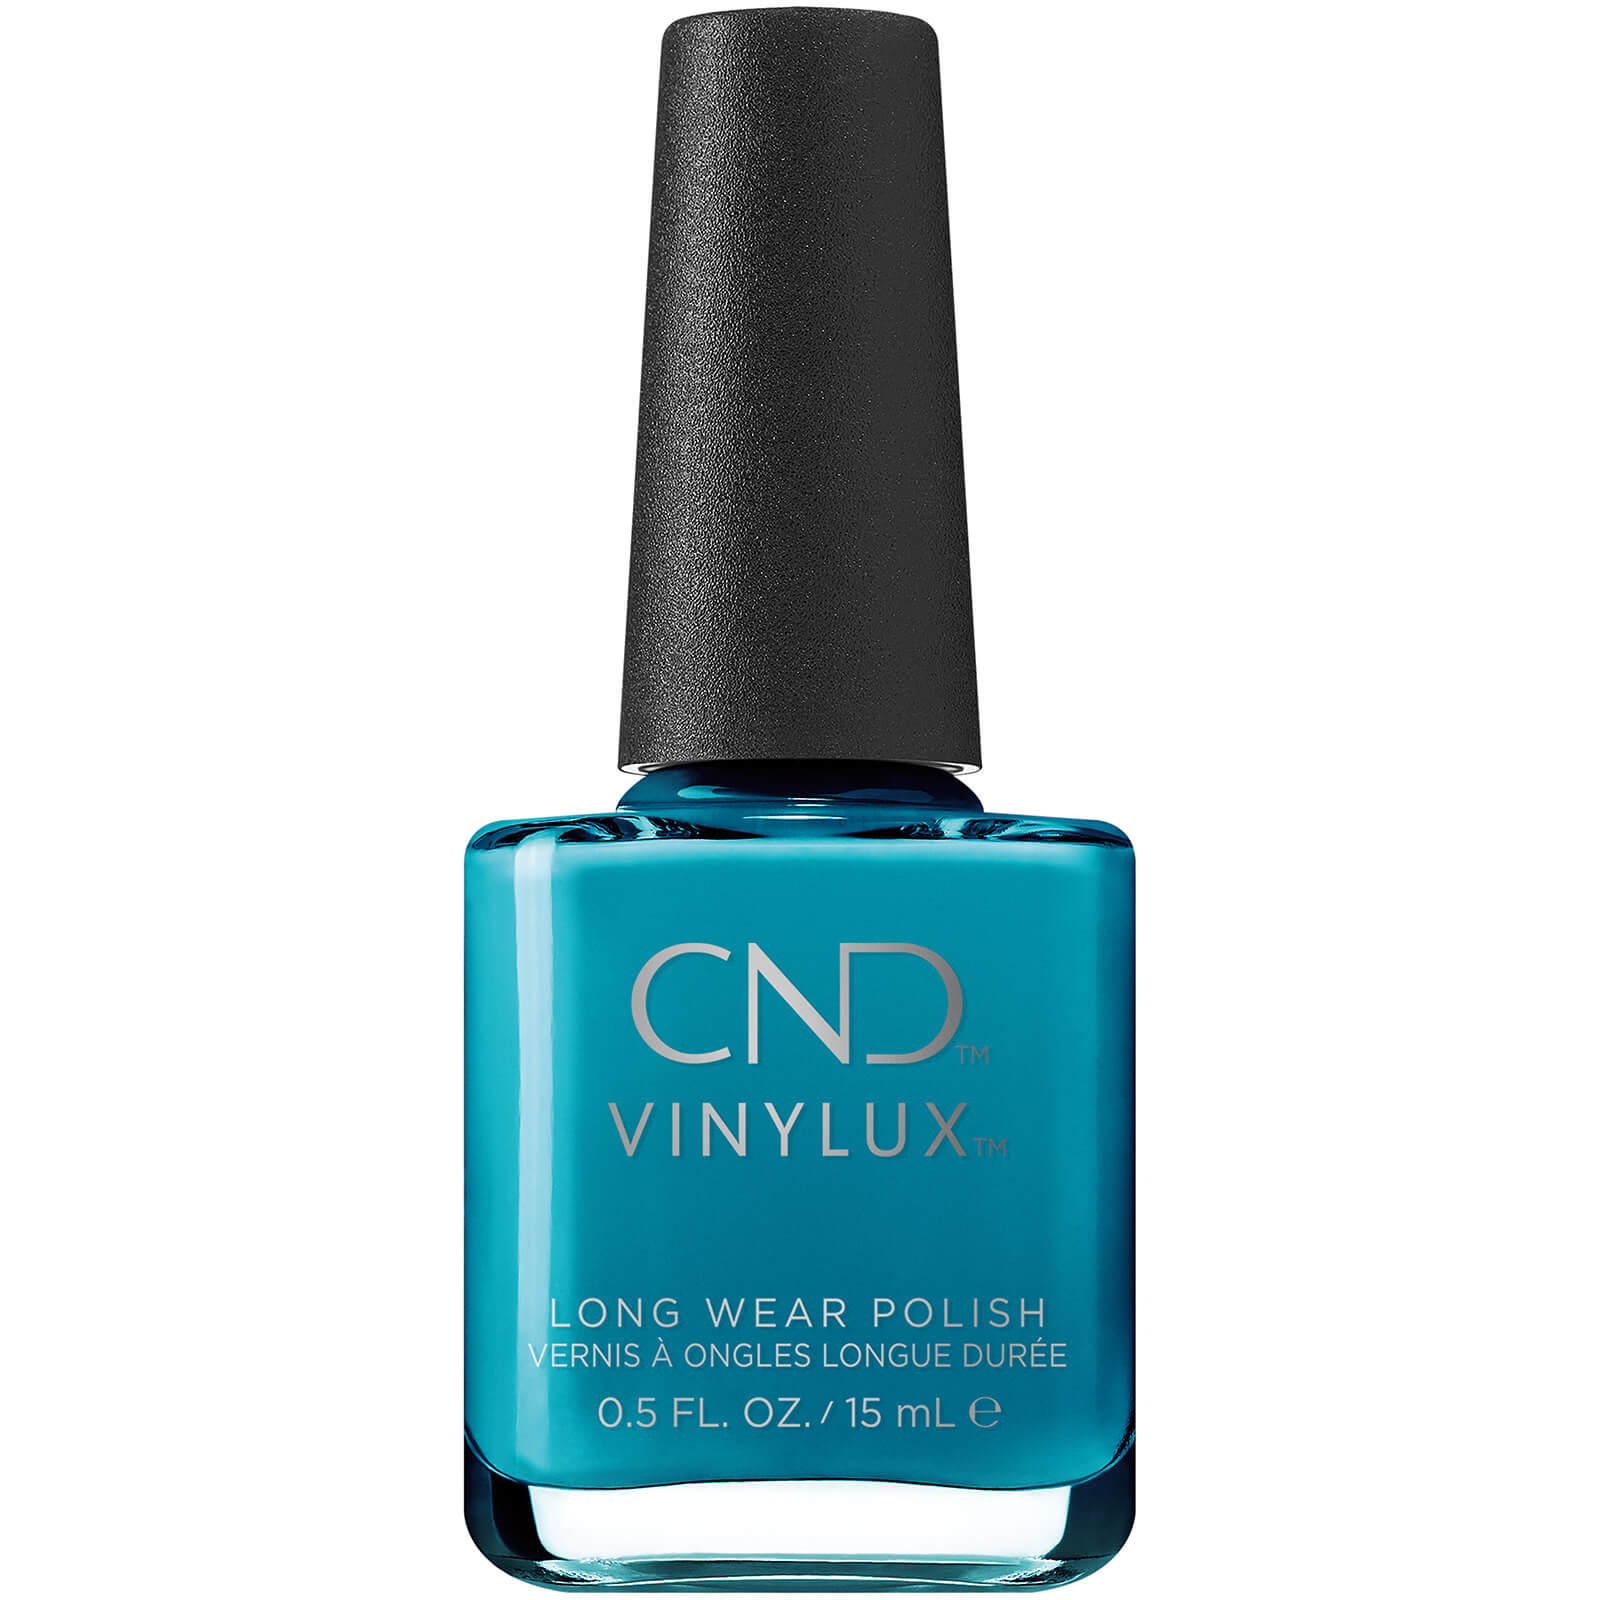 Cnd Vinylux Nail Varnish - Boats And Bikinis In Blue